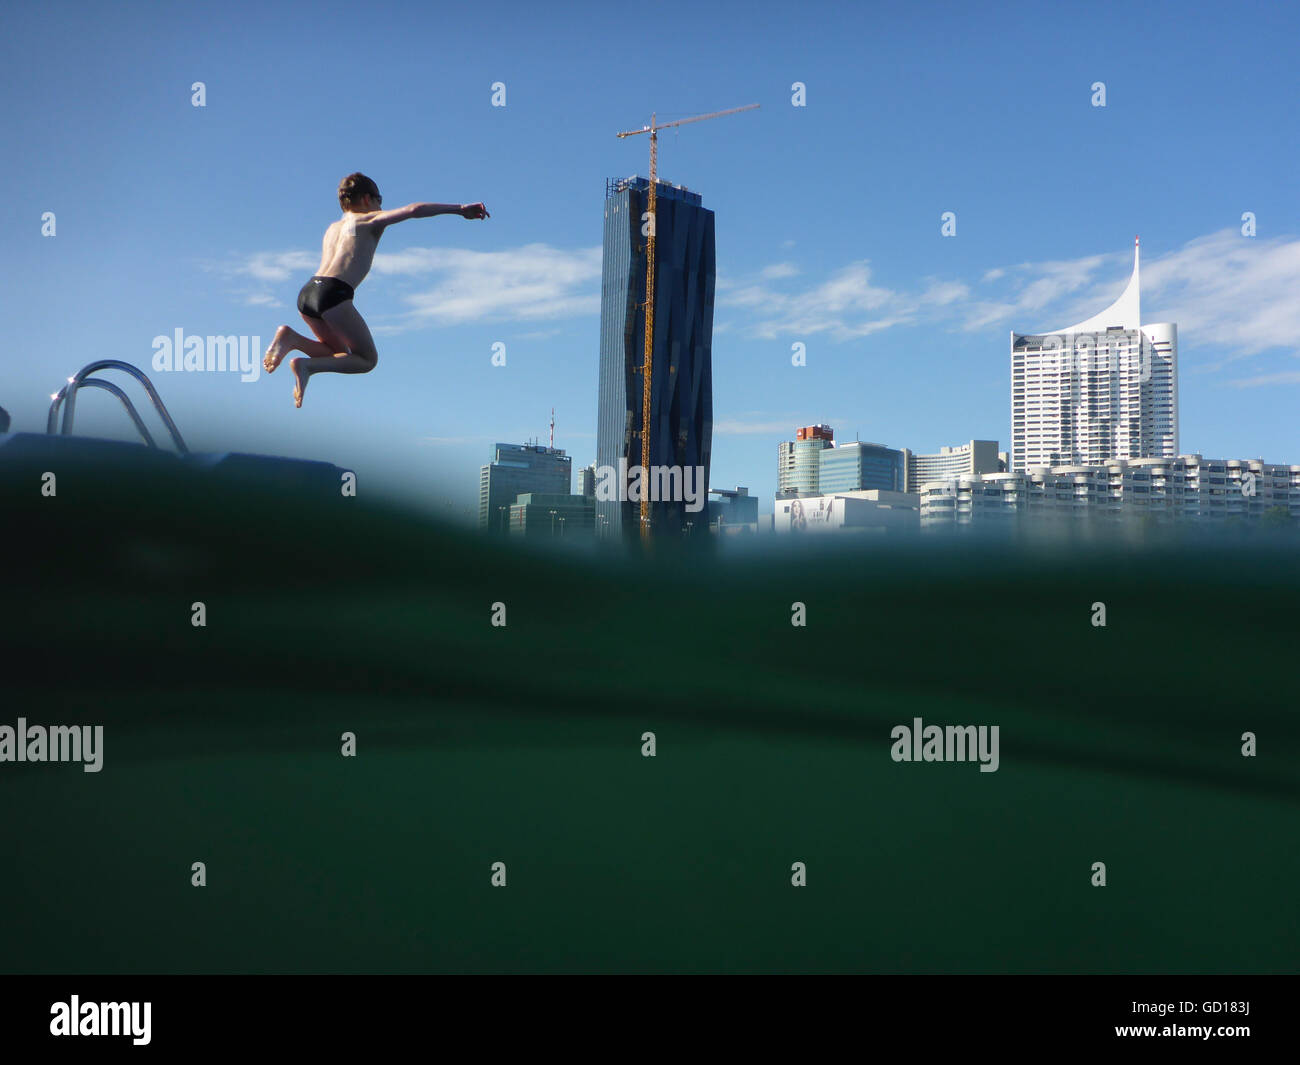 Wien, Vienna: Boy jumps in the New Danube before the DC Tower and the Danube City, Austria, Wien, 22. Stock Photo